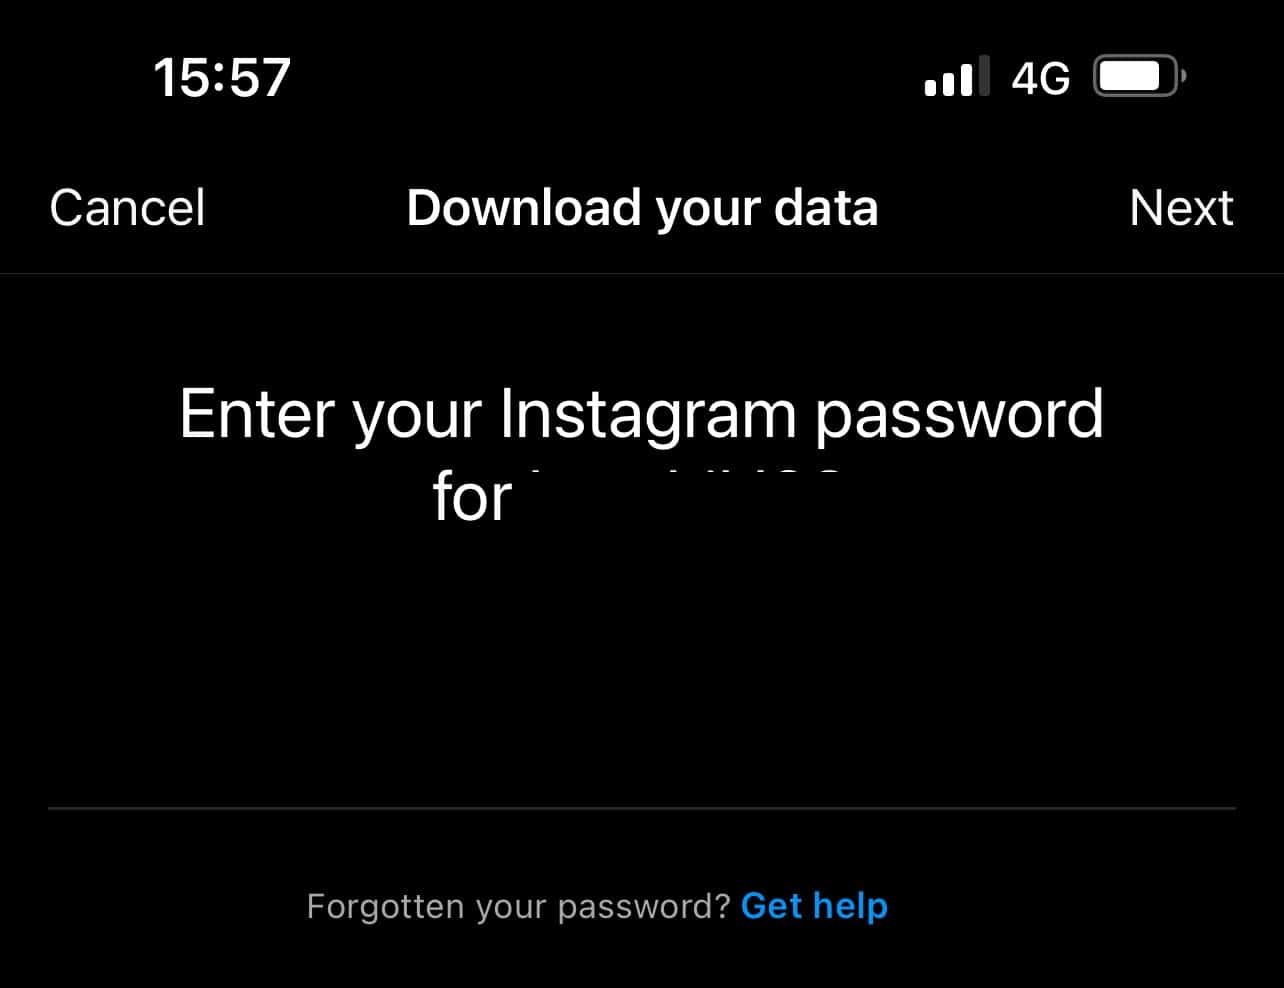 Enter The Password And Tap Next To Download Data On Instagram